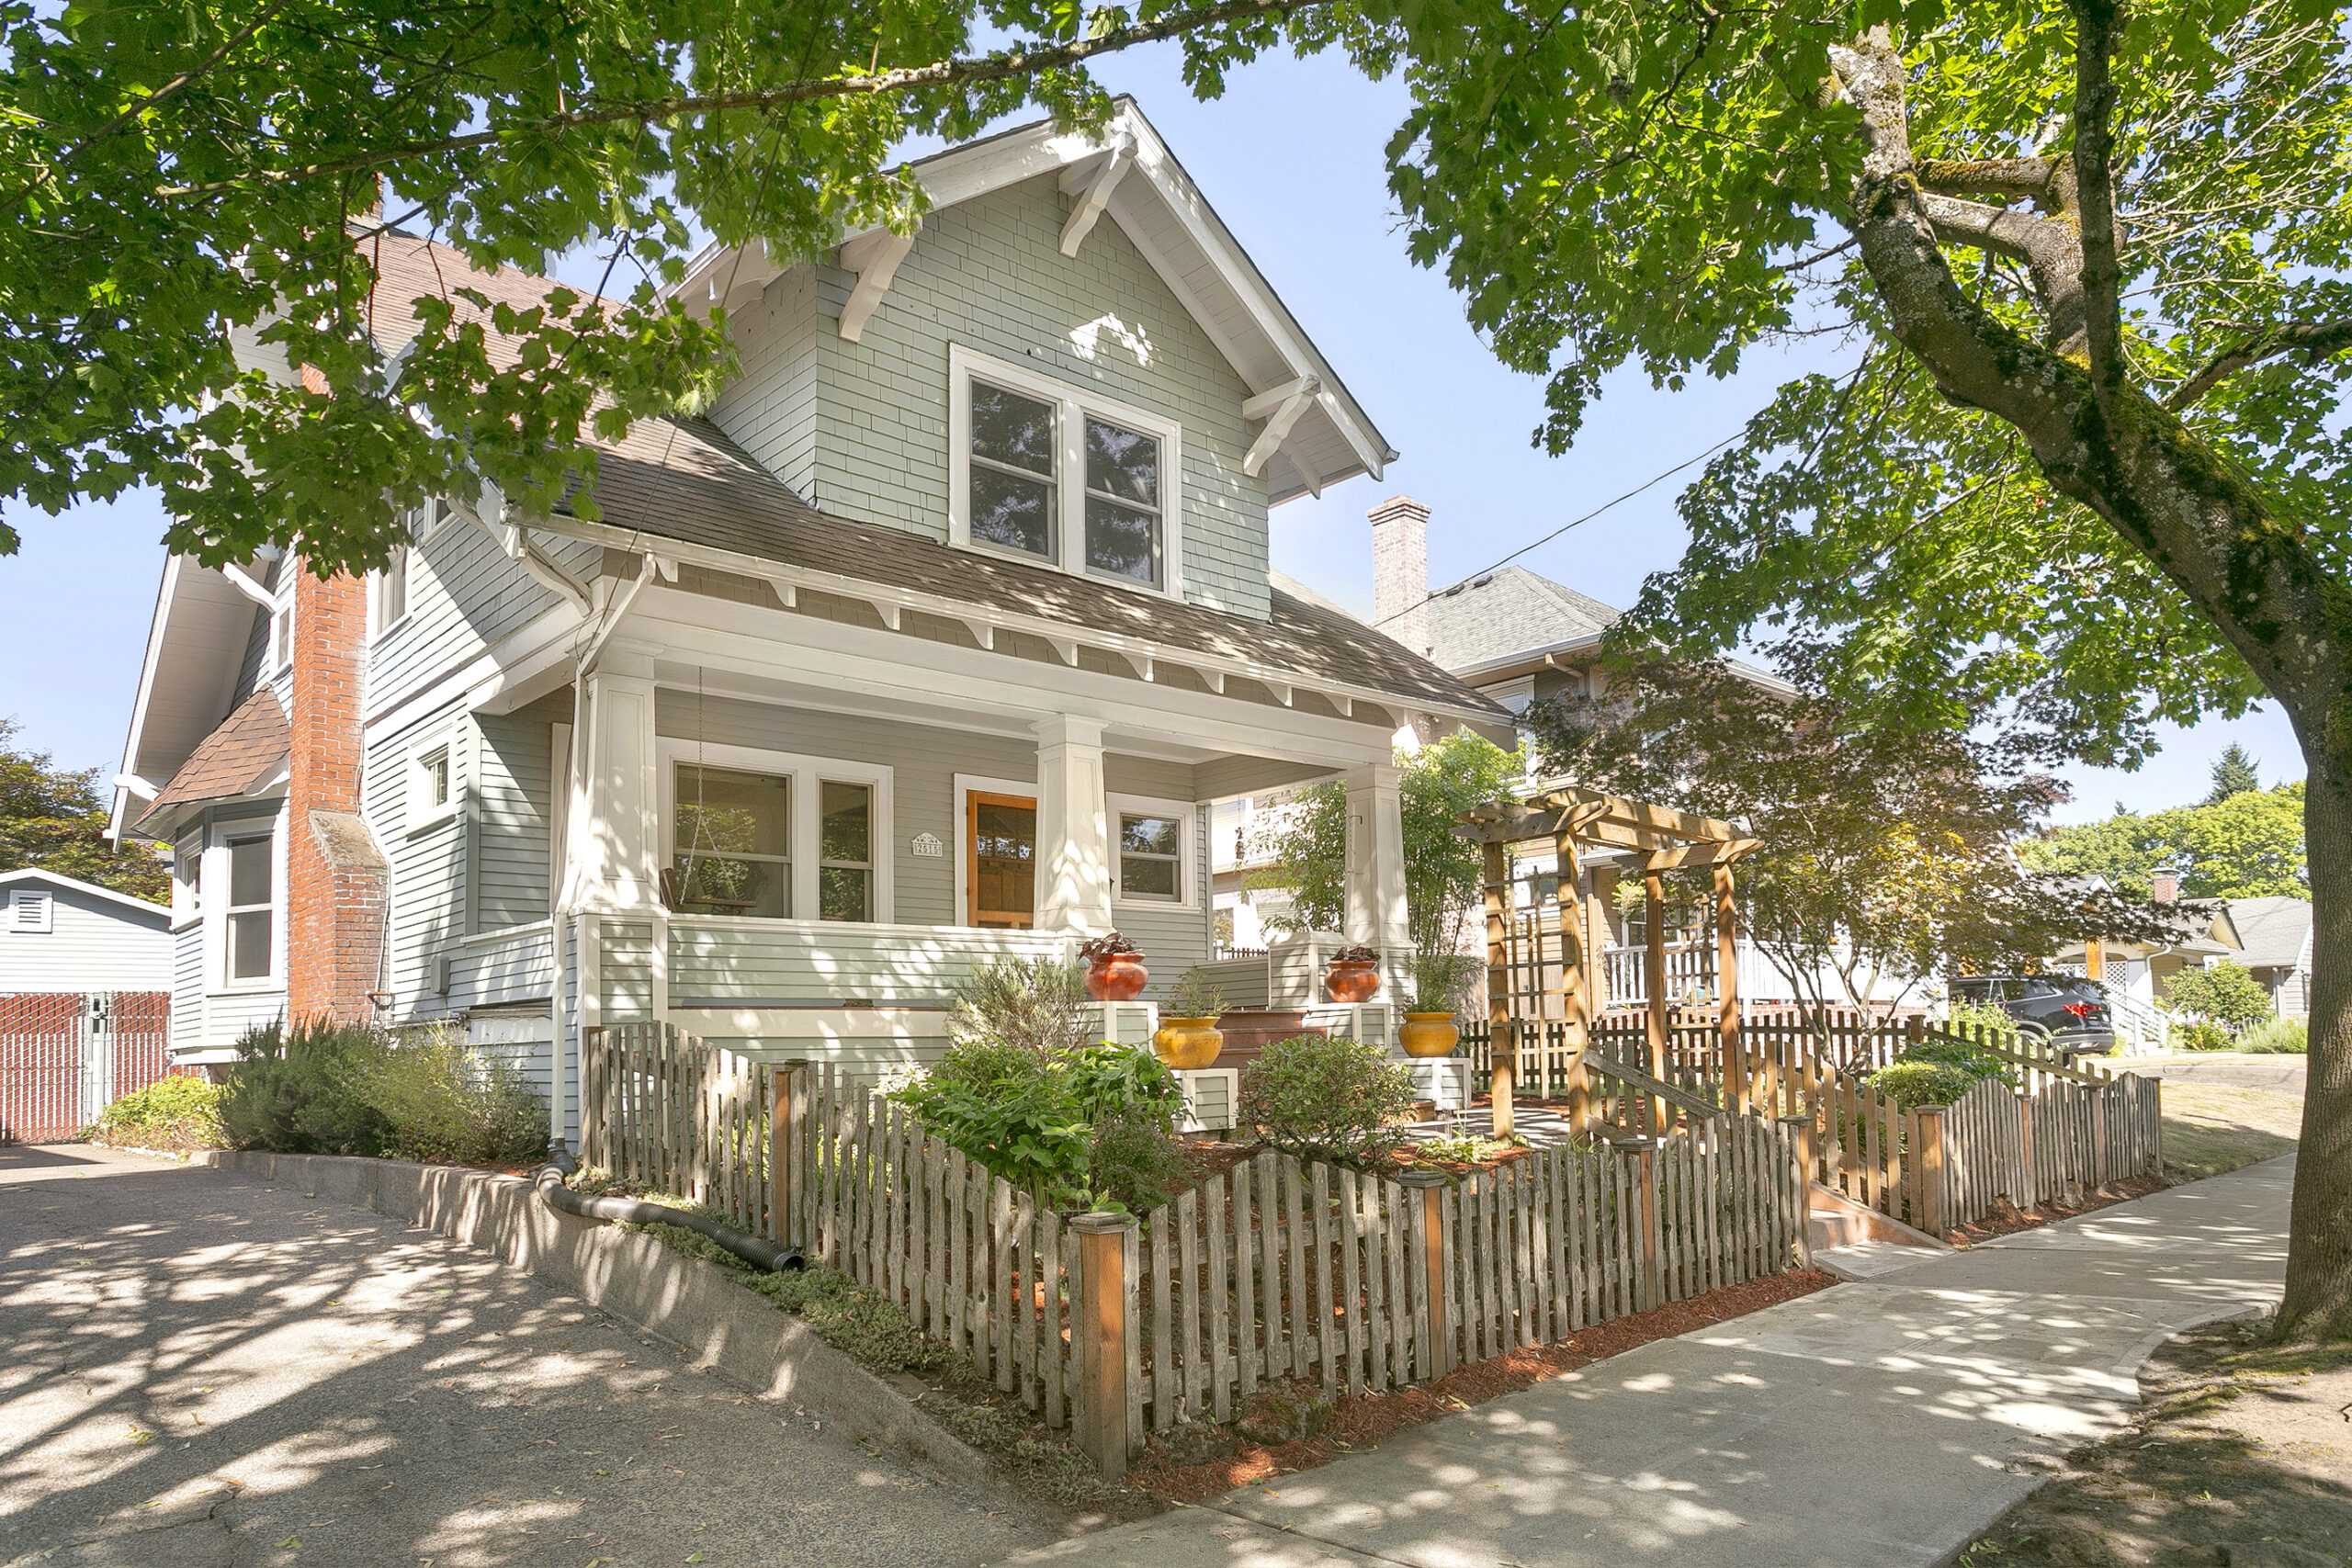 You Will Love This Grant Park/Hollywood Four Square